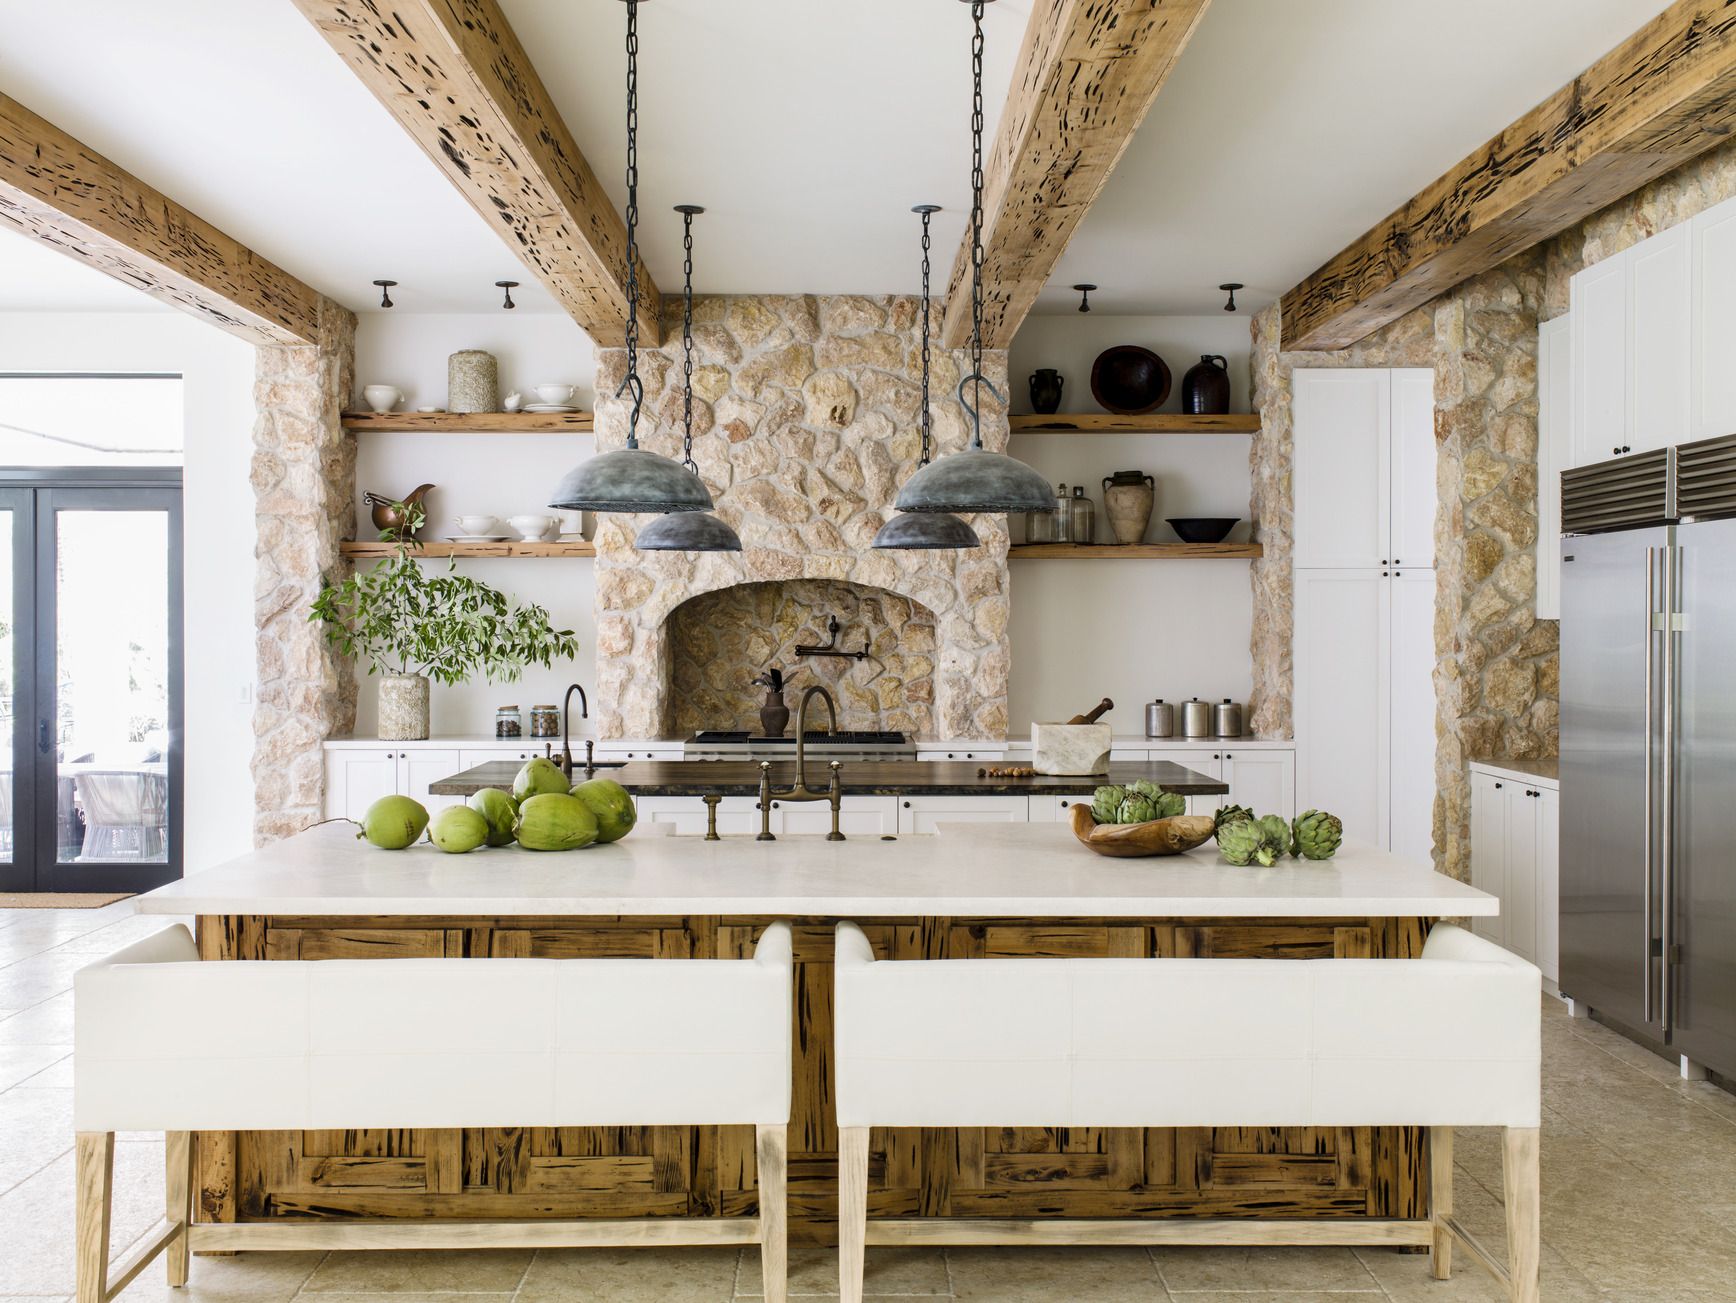 The Complete Guide to Stylishly Decorating Your Kitchen Island